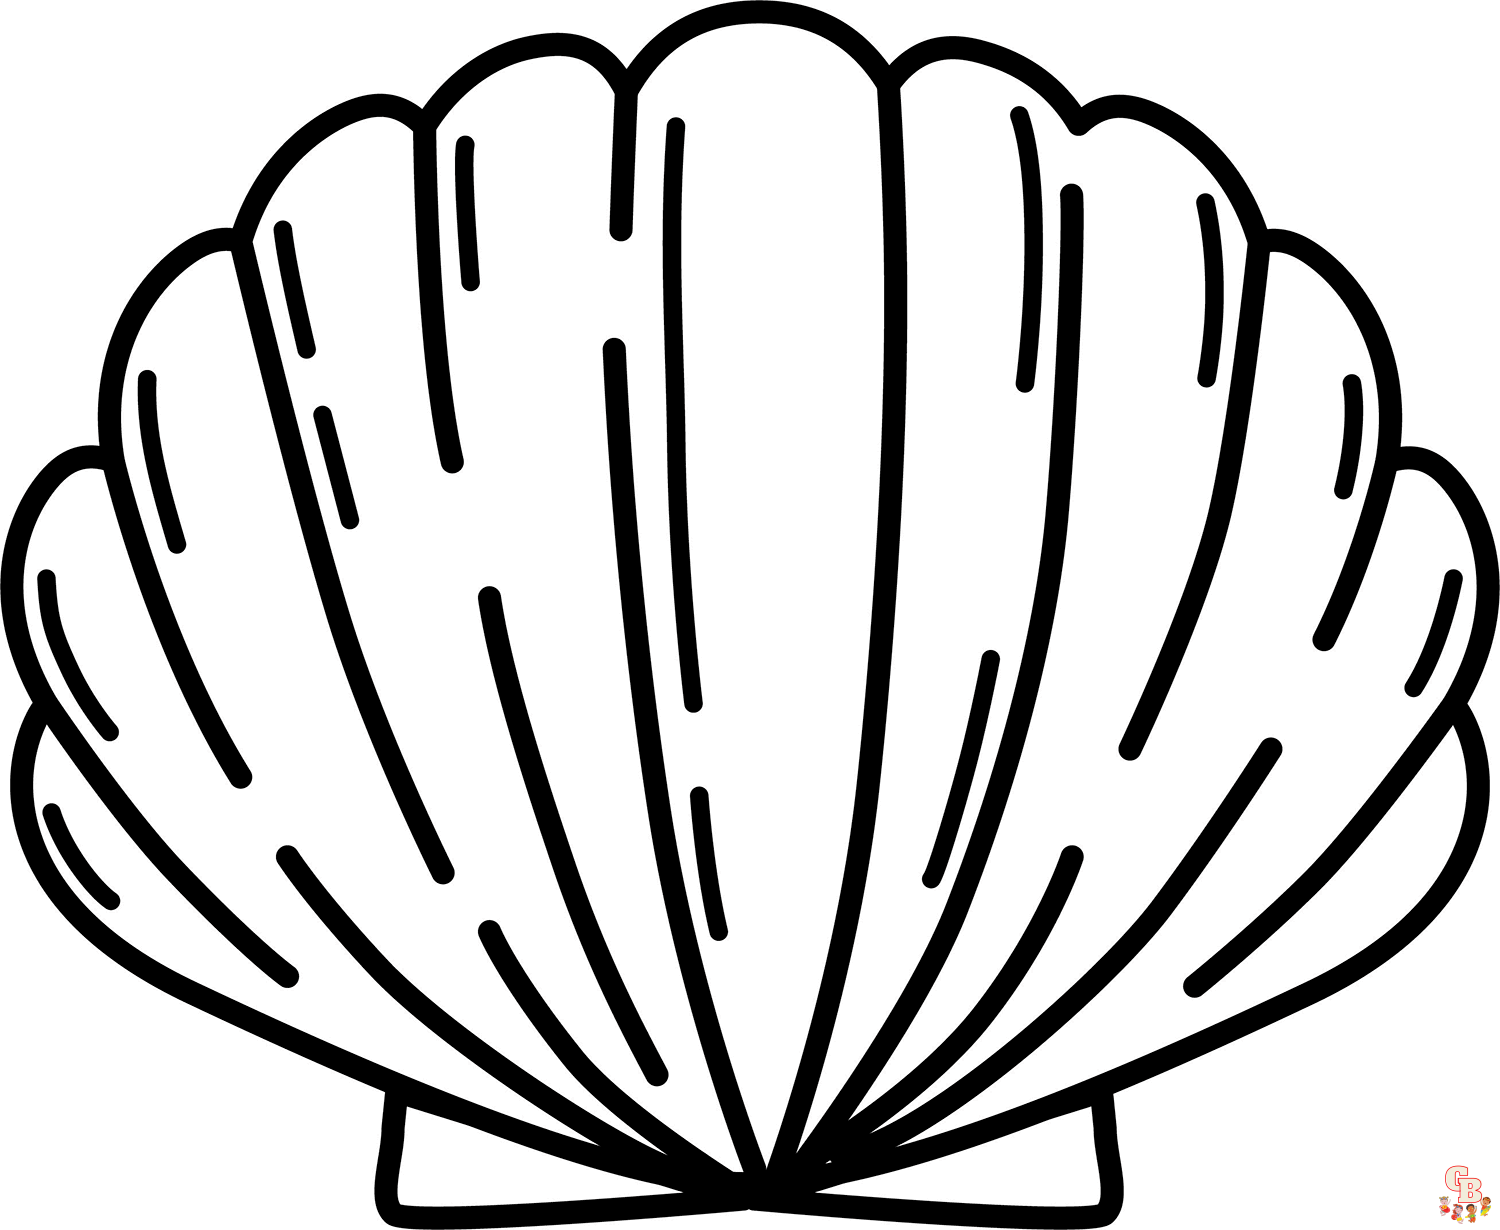 Seashell Coloring Pages 2